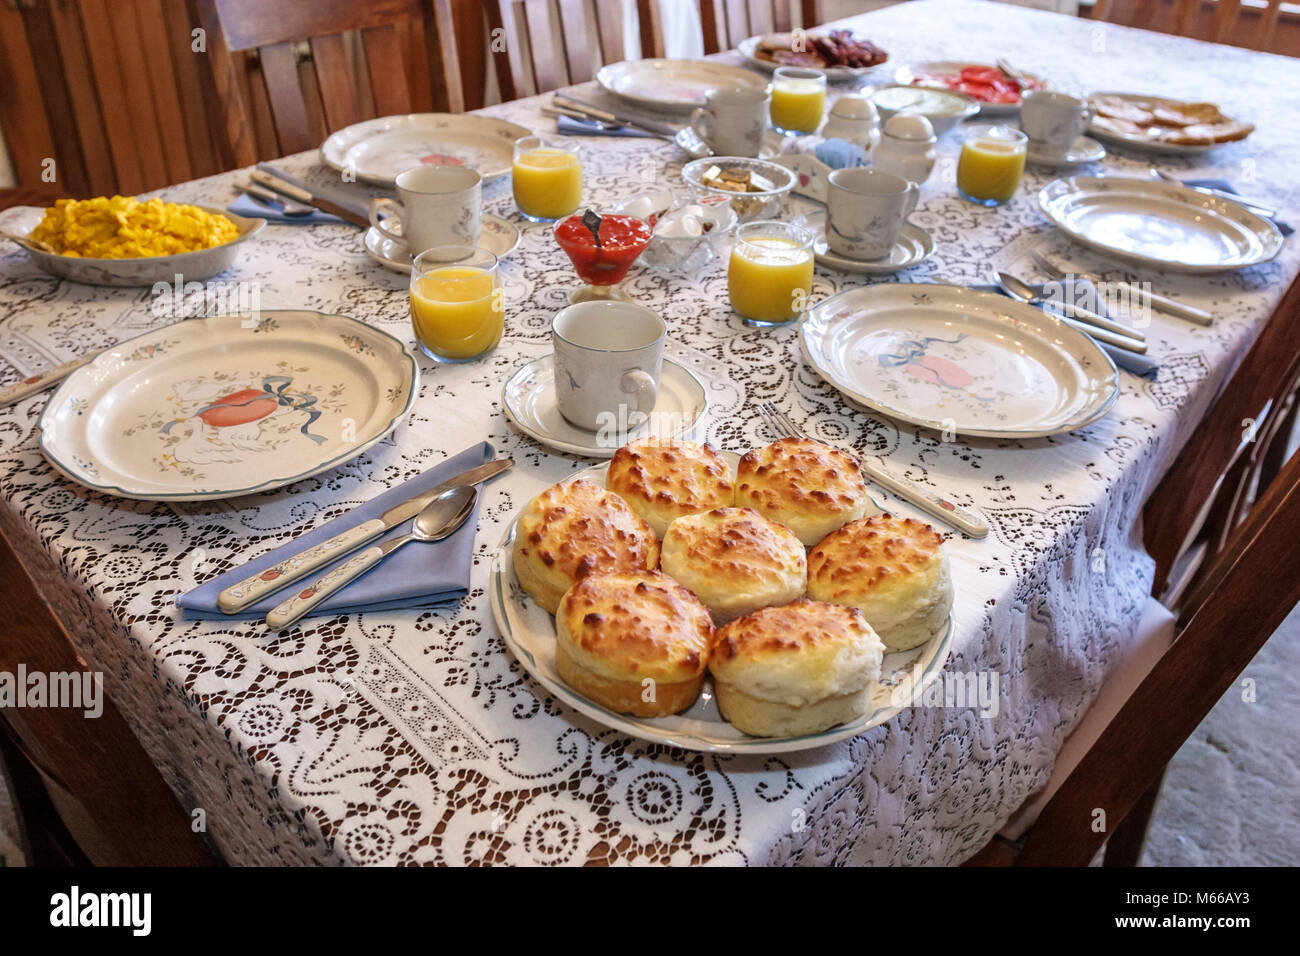 West Virginia Greenbrier County,Lewisburg,Lynn's Inn,Bed & Breakfast,lodging,home away from home,lodging,country style breakfast,homemade biscuits,WV0 Stock Photo